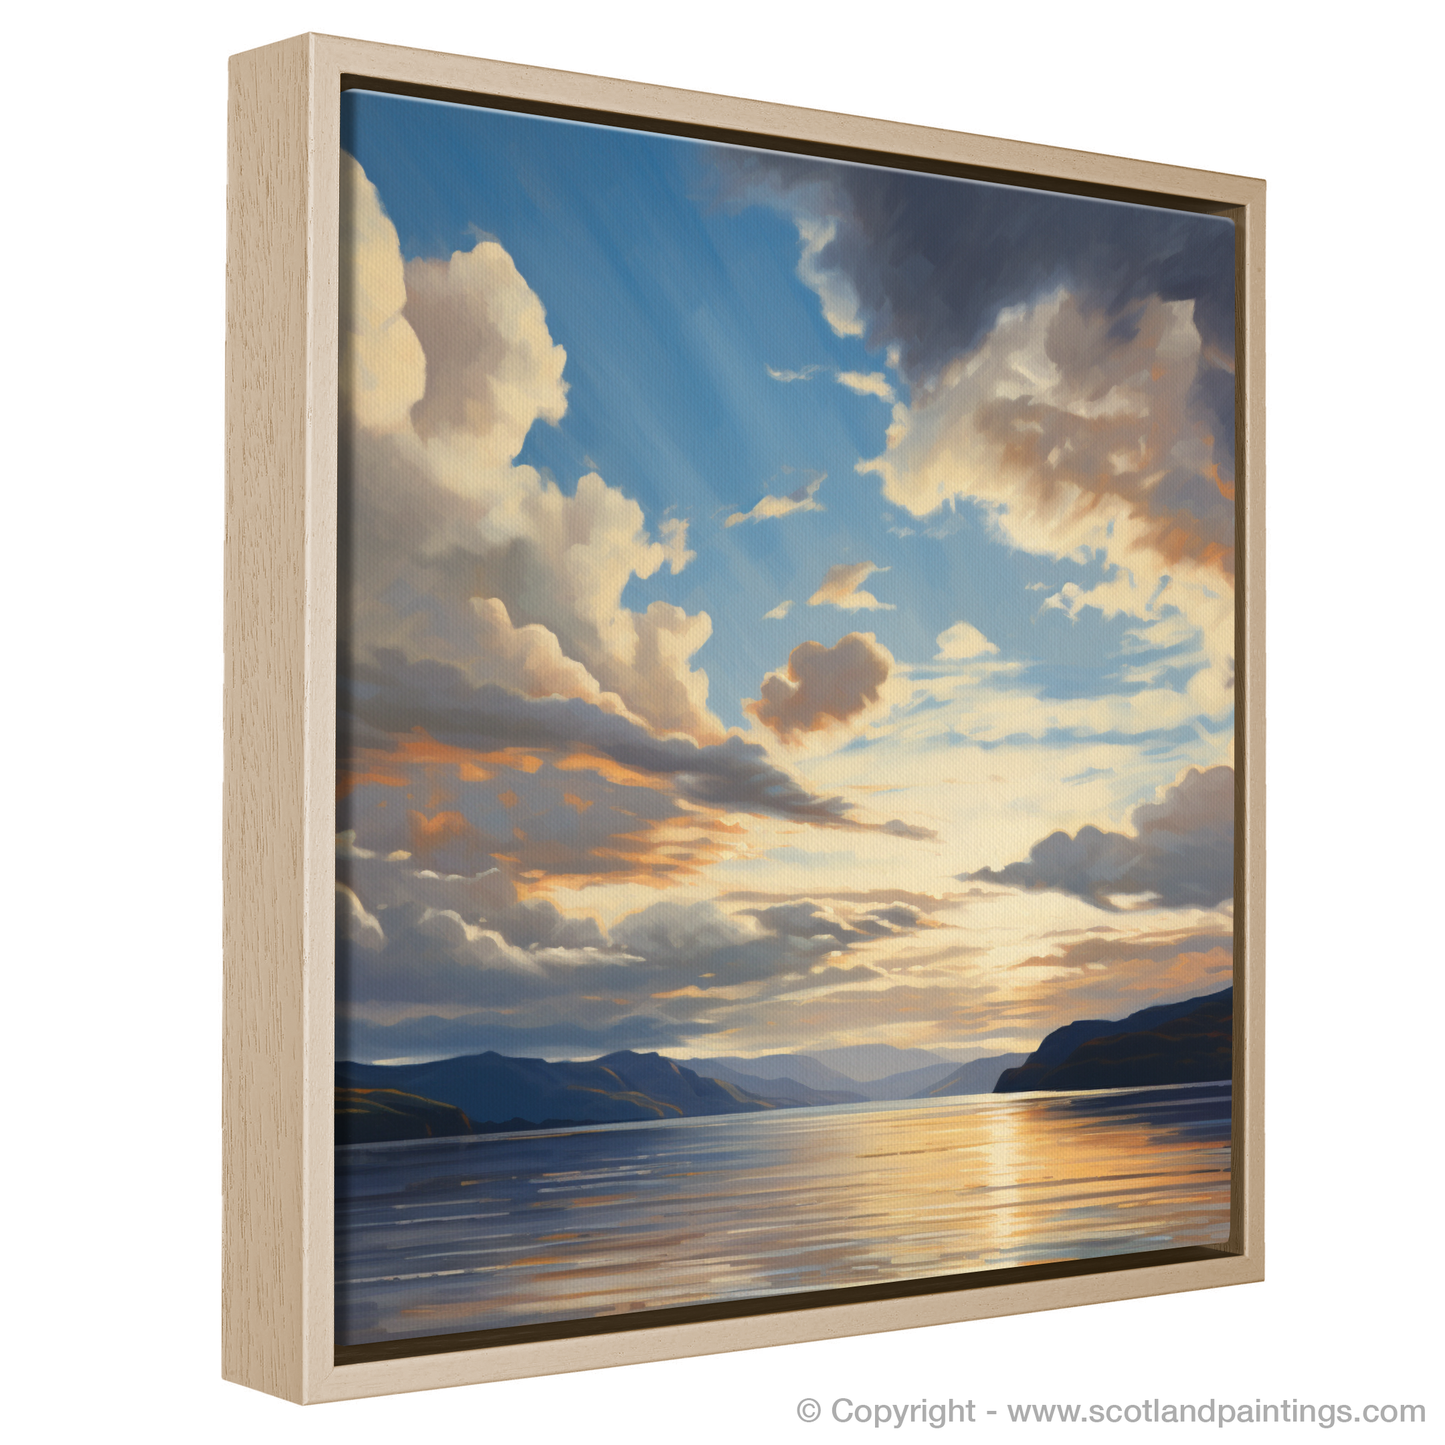 Painting and Art Print of A huge sky above Loch Lomond entitled "Majestic Skies Over Loch Lomond".